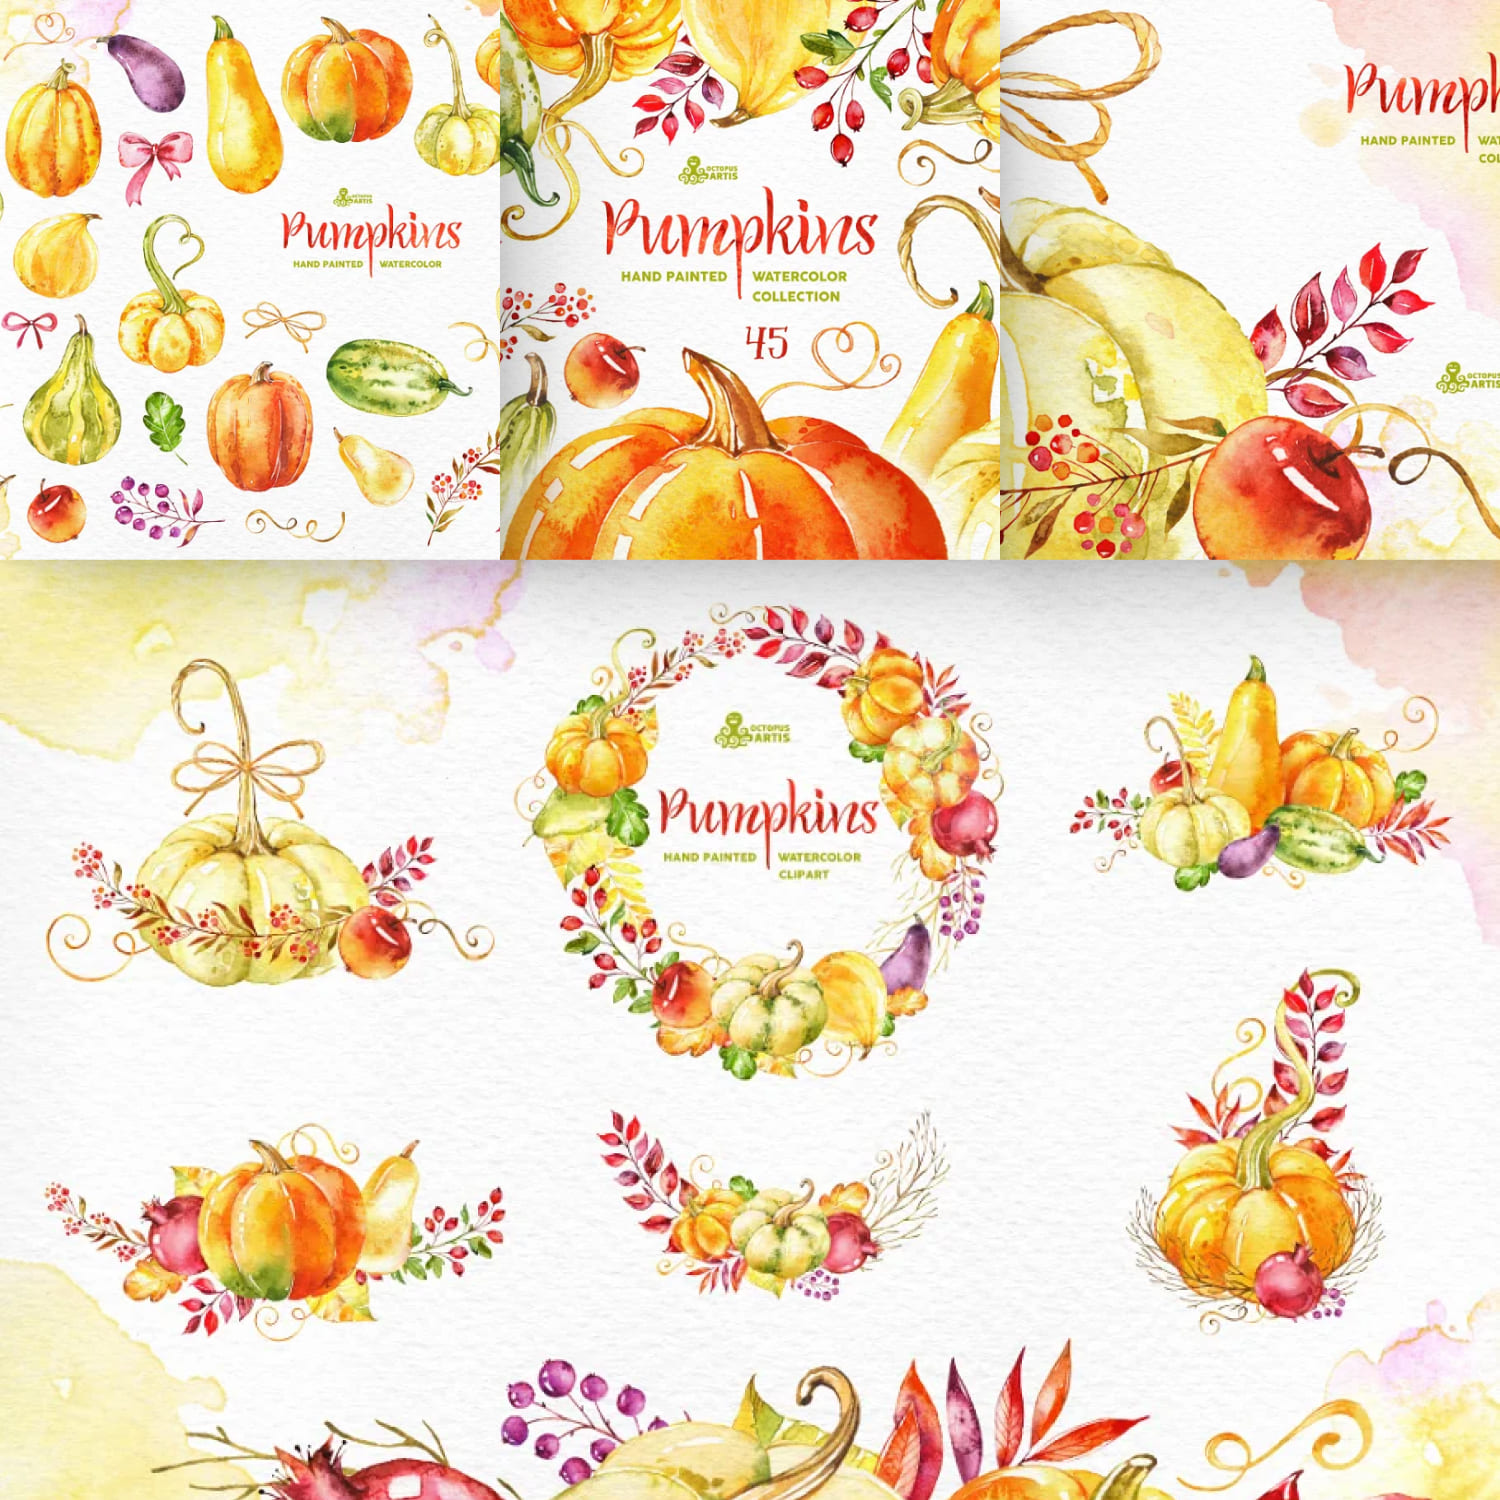 Pumpkins. Watercolor collection cover.